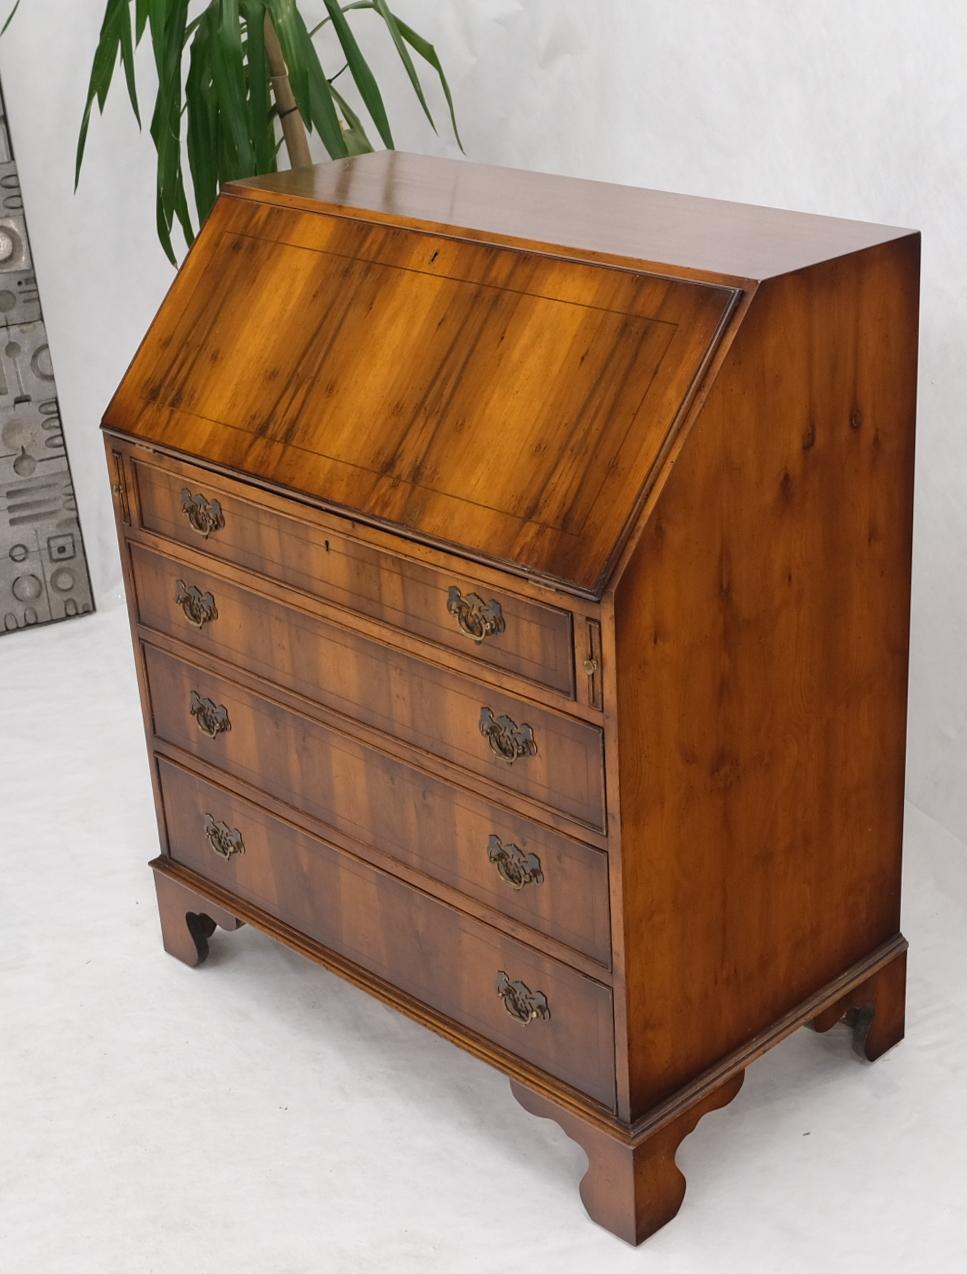 Tall Federal Style drop front secretary individual pains glass door bookcase. Stunning exotic wood pattern. Four storage drawers.